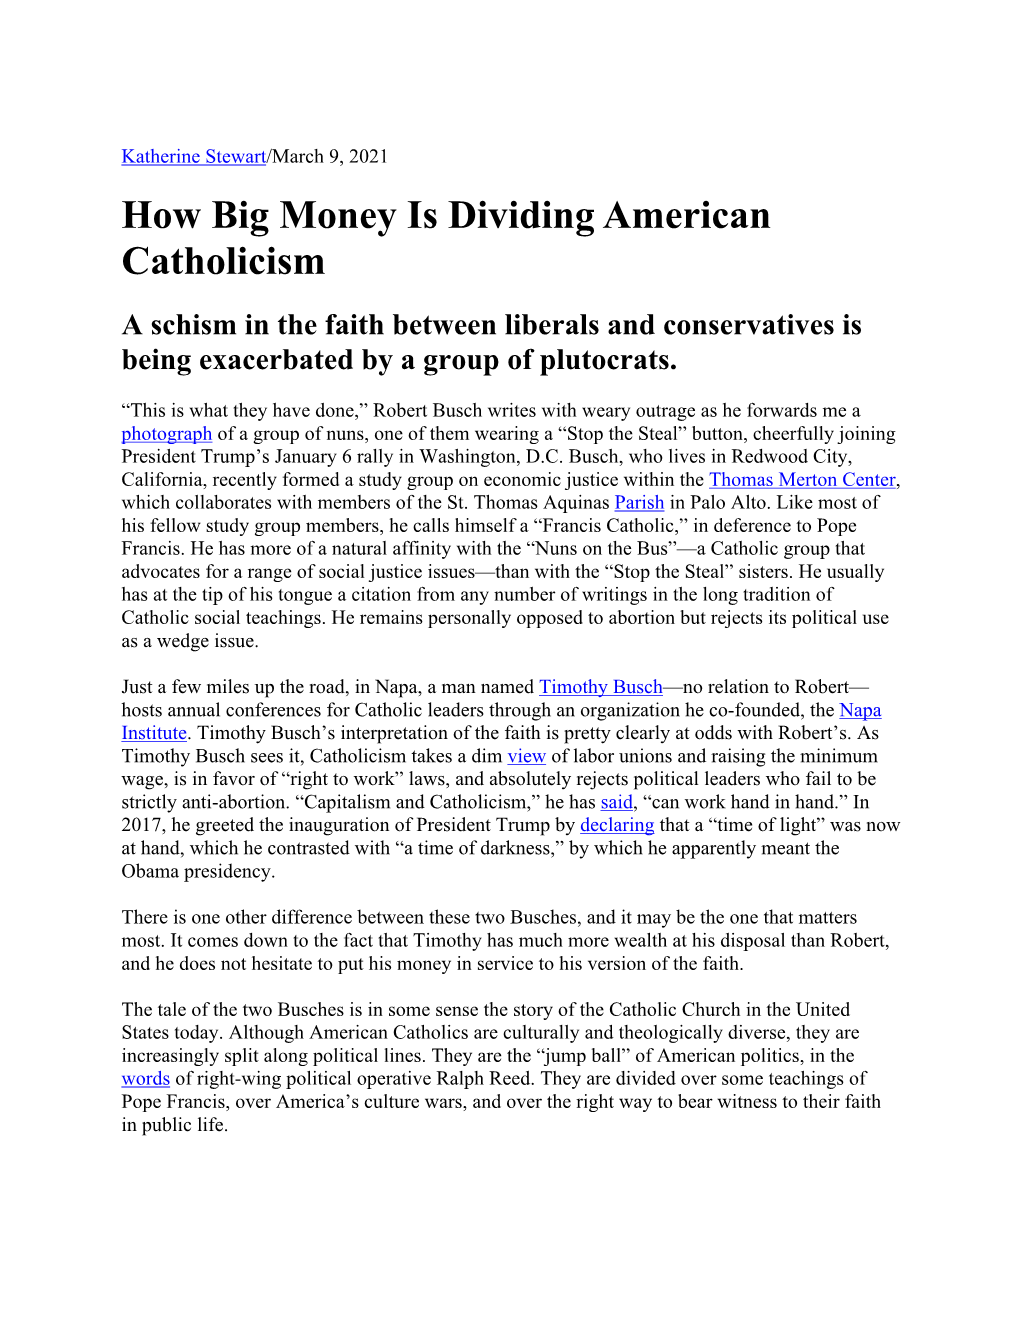 How Big Money Is Dividing American Catholicism a Schism in the Faith Between Liberals and Conservatives Is Being Exacerbated by a Group of Plutocrats